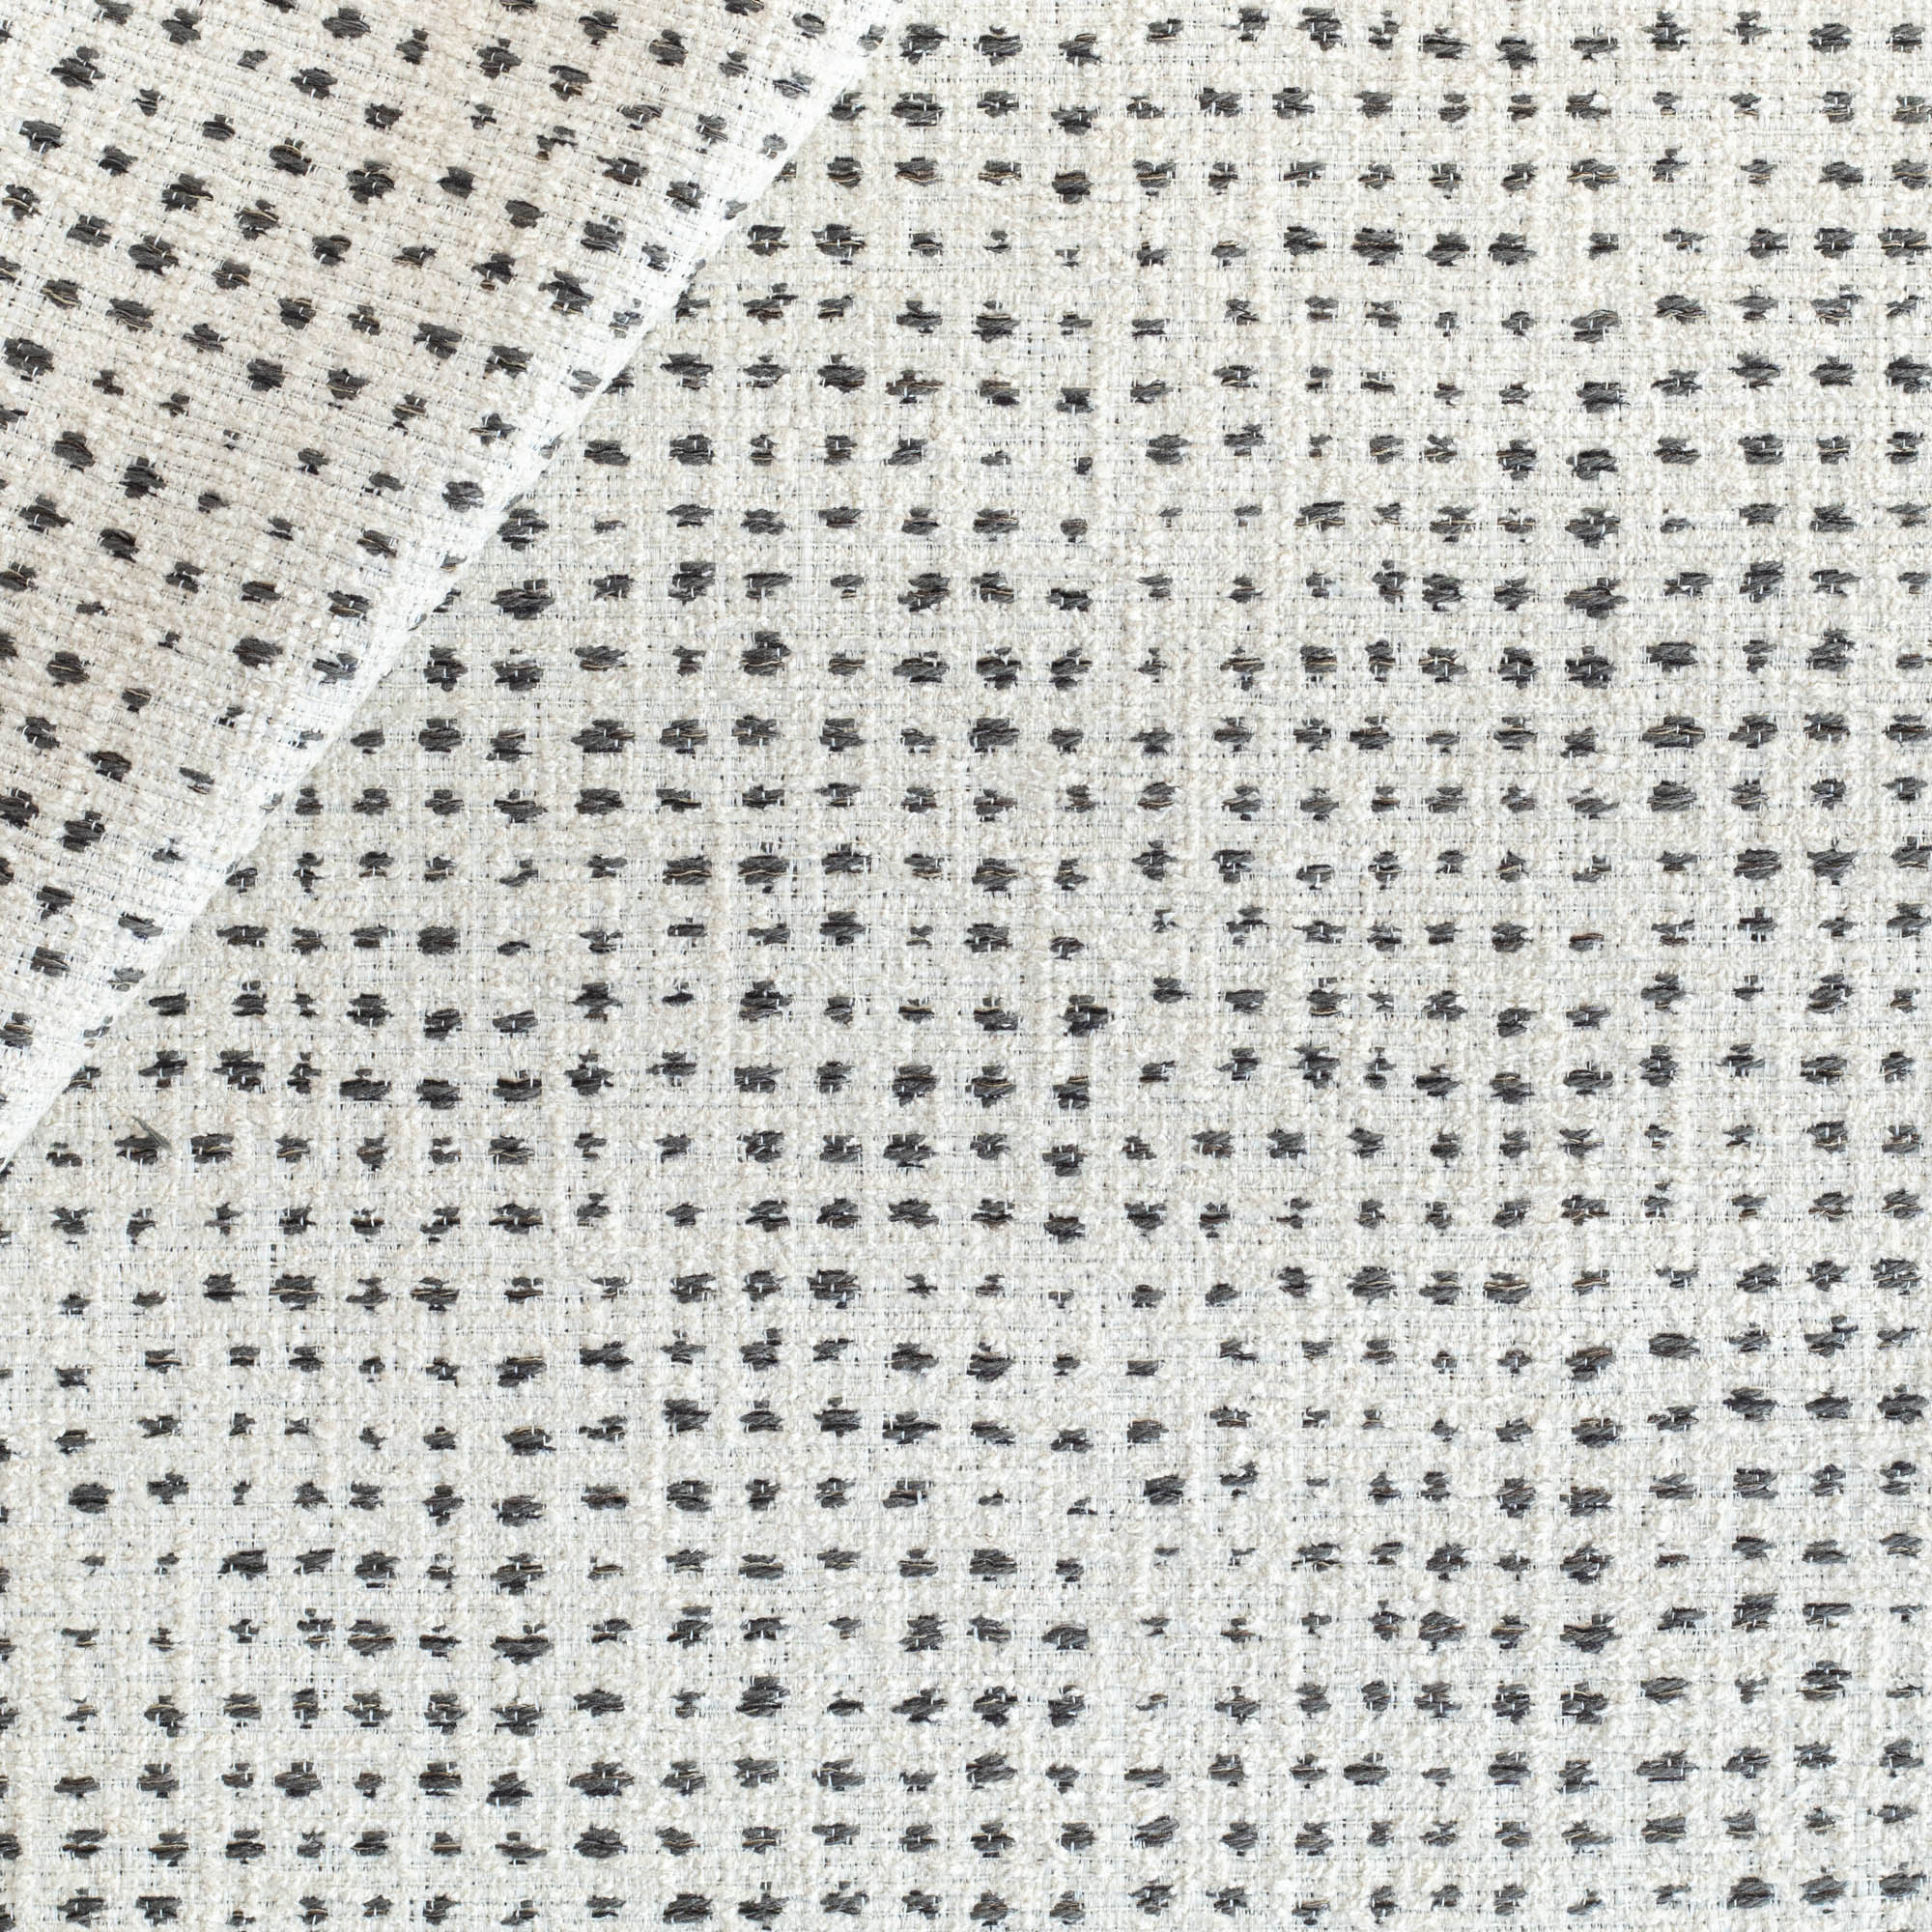 an off-whitee and black variegated polka-dot patterned textured upholstery fabric